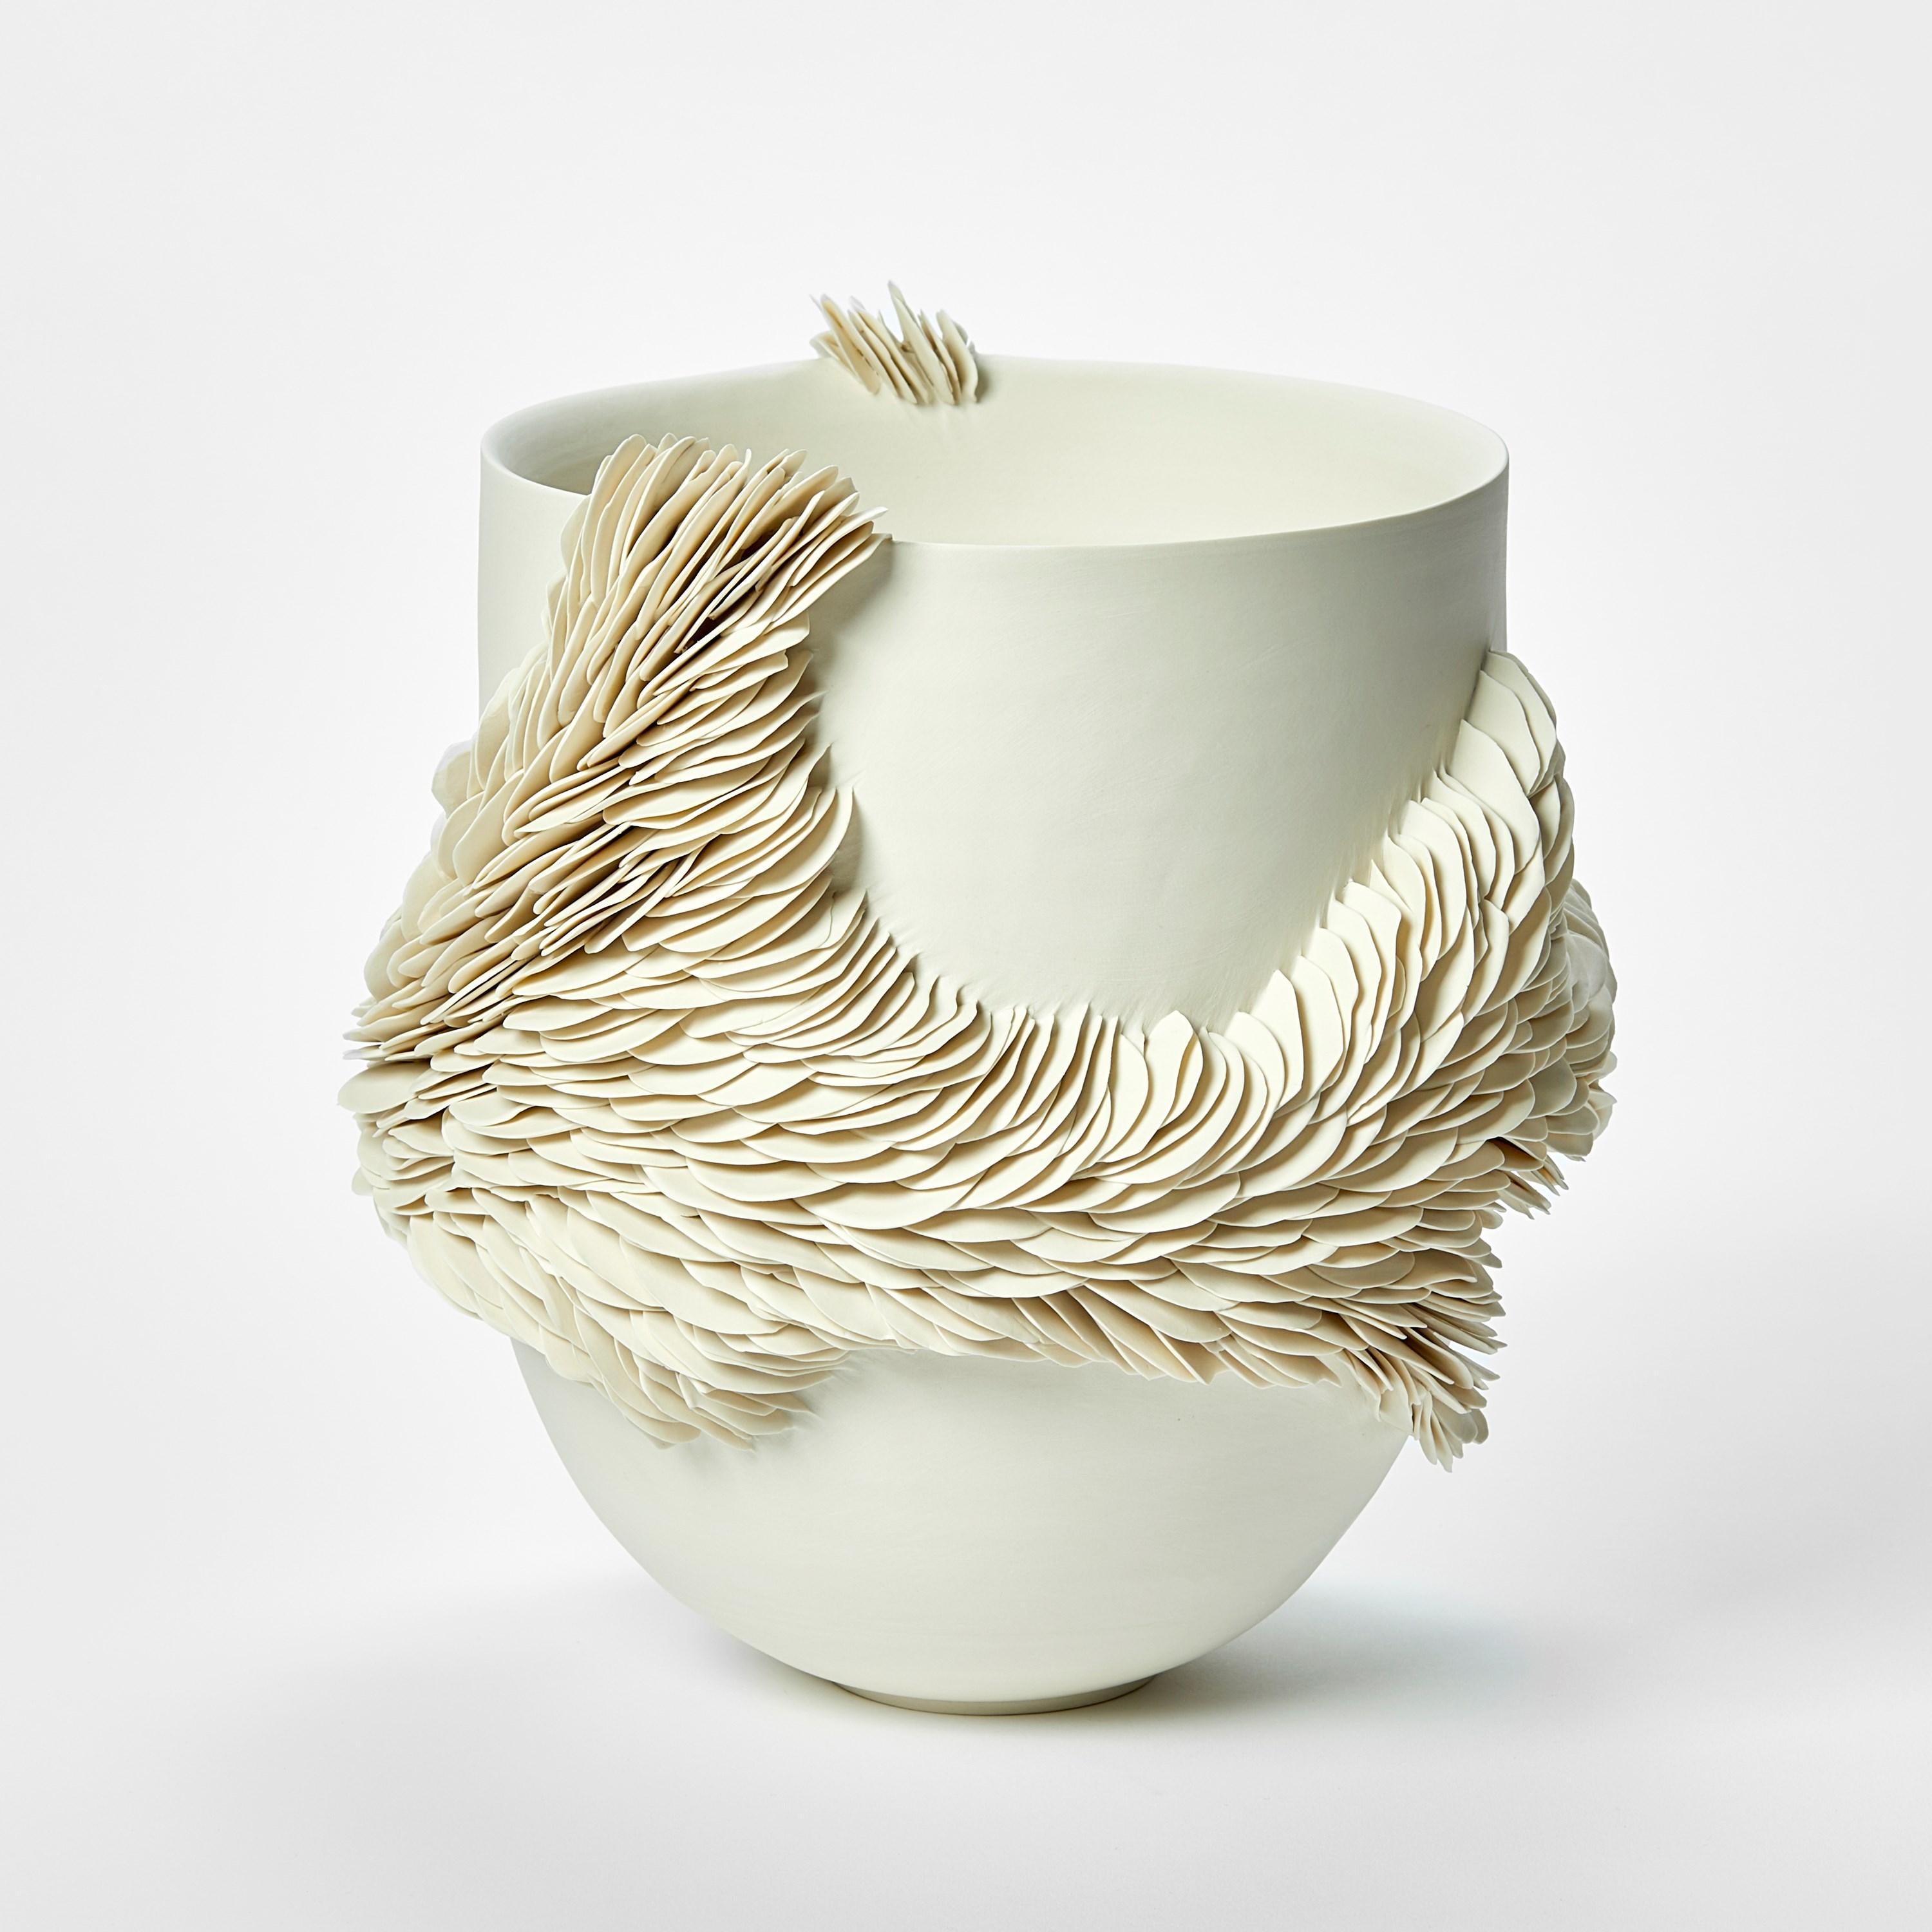 Hand-Crafted White Tall Wrapping Bowl I, a porcelain shard textured bowl by Olivia Walker